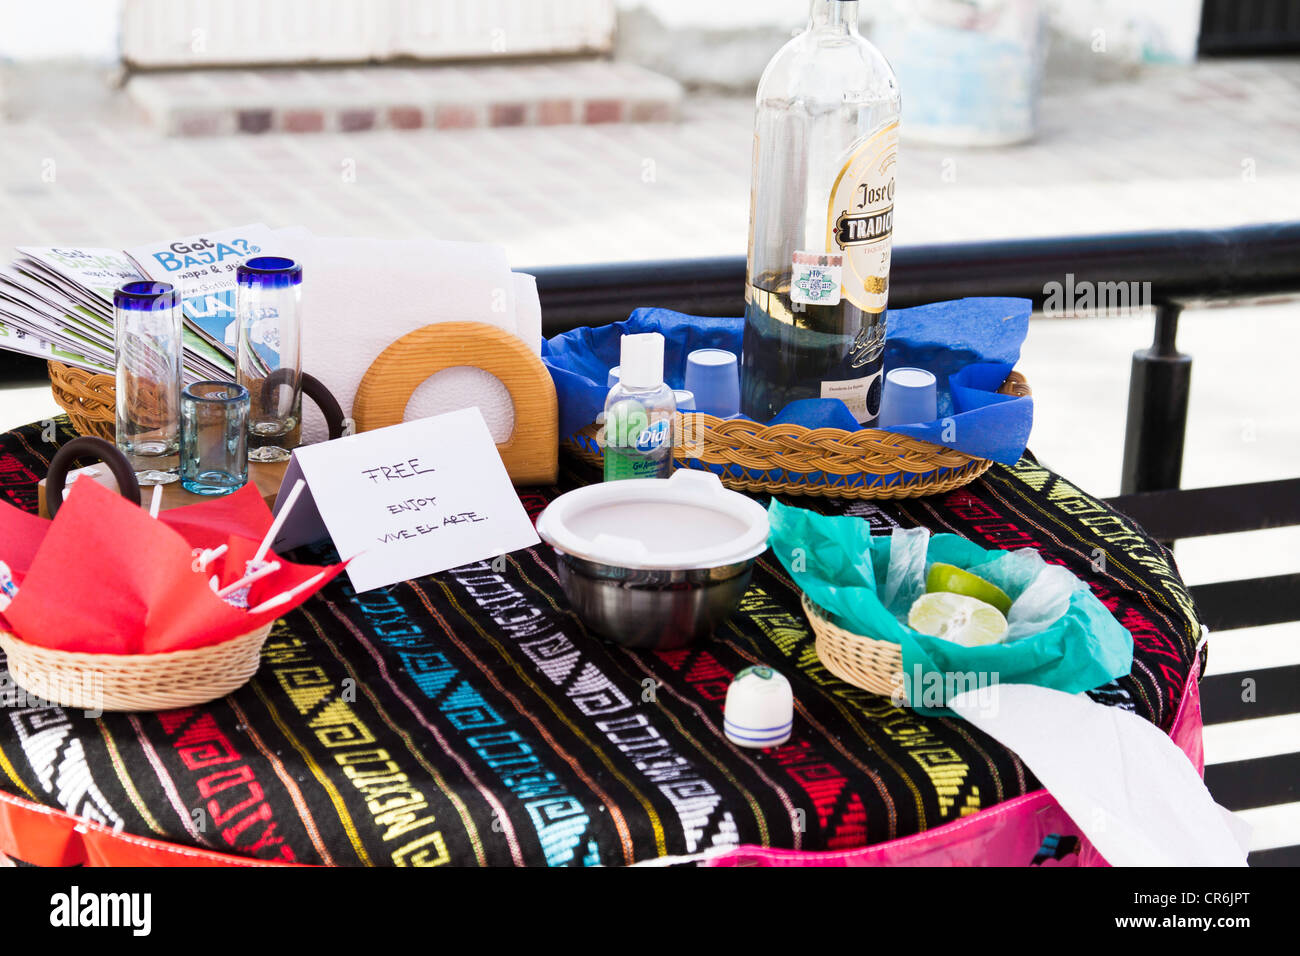 Free tequila offered during art festival in 'Todos Santos' Baja Mexico Stock Photo